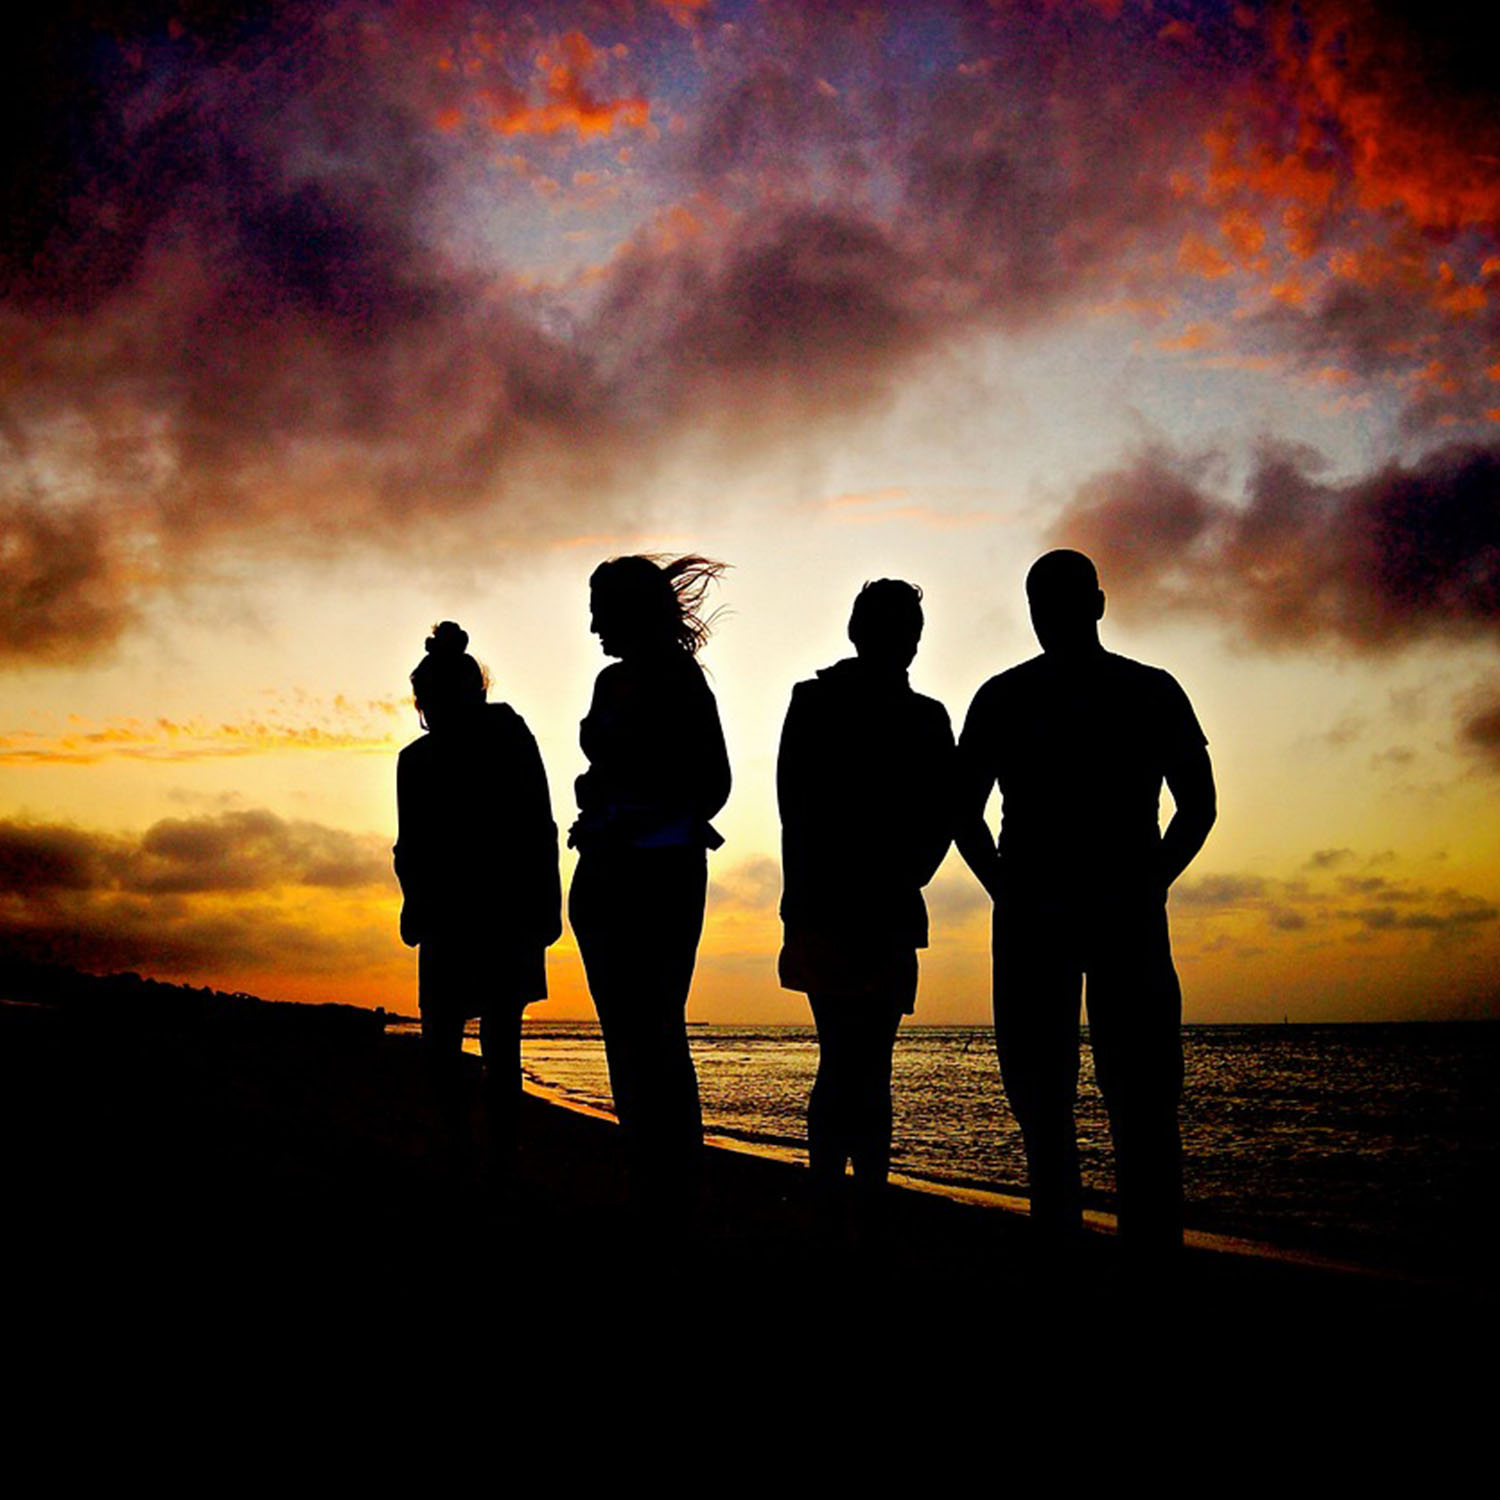 Photograph of young adults standing on a shoreline looking into a sunset.